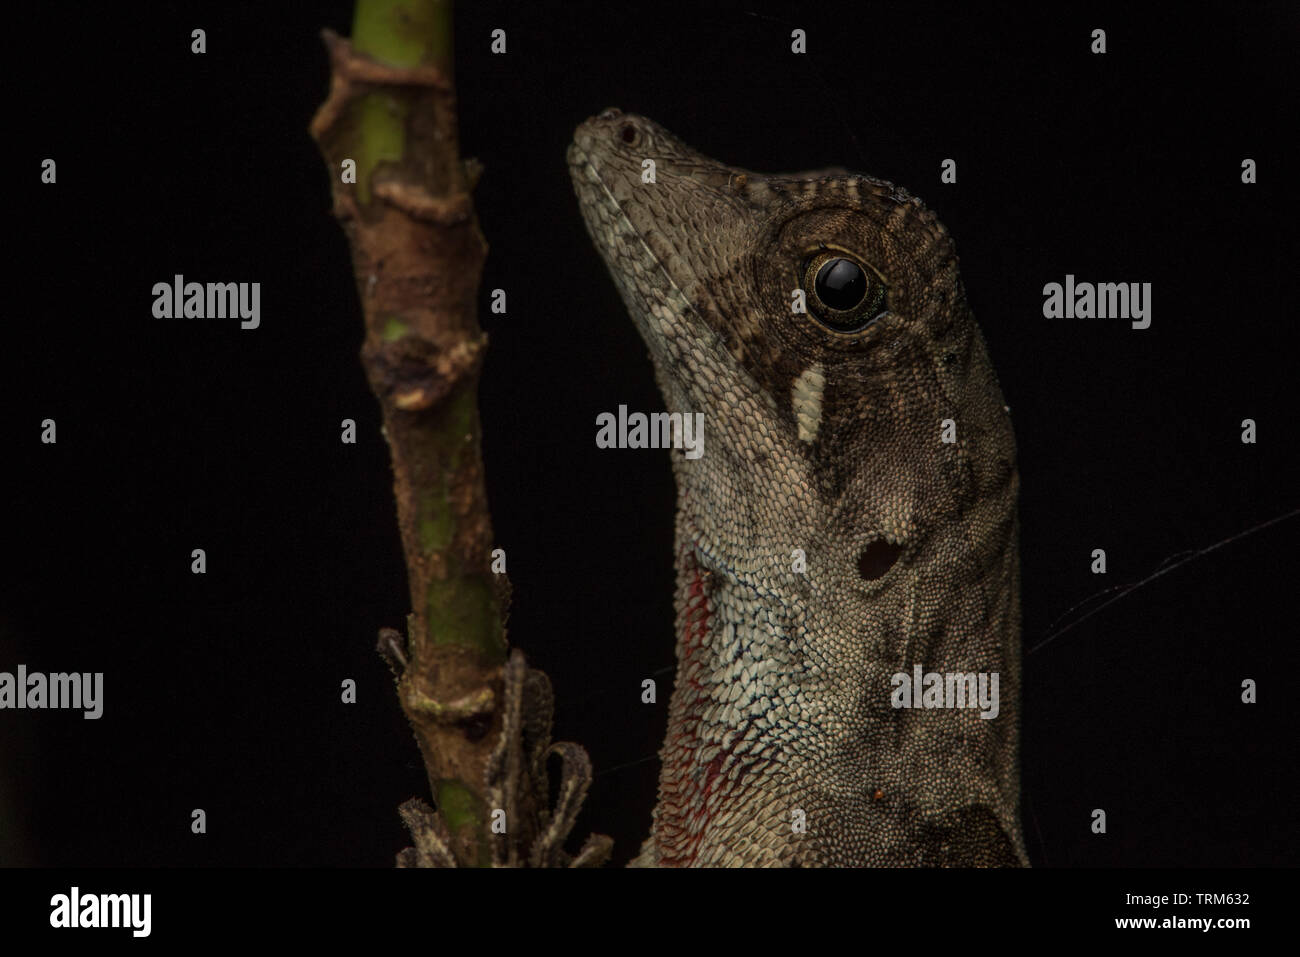 A close up of an anole lizard's face in the Amazon rainforest in Ecuador. Stock Photo